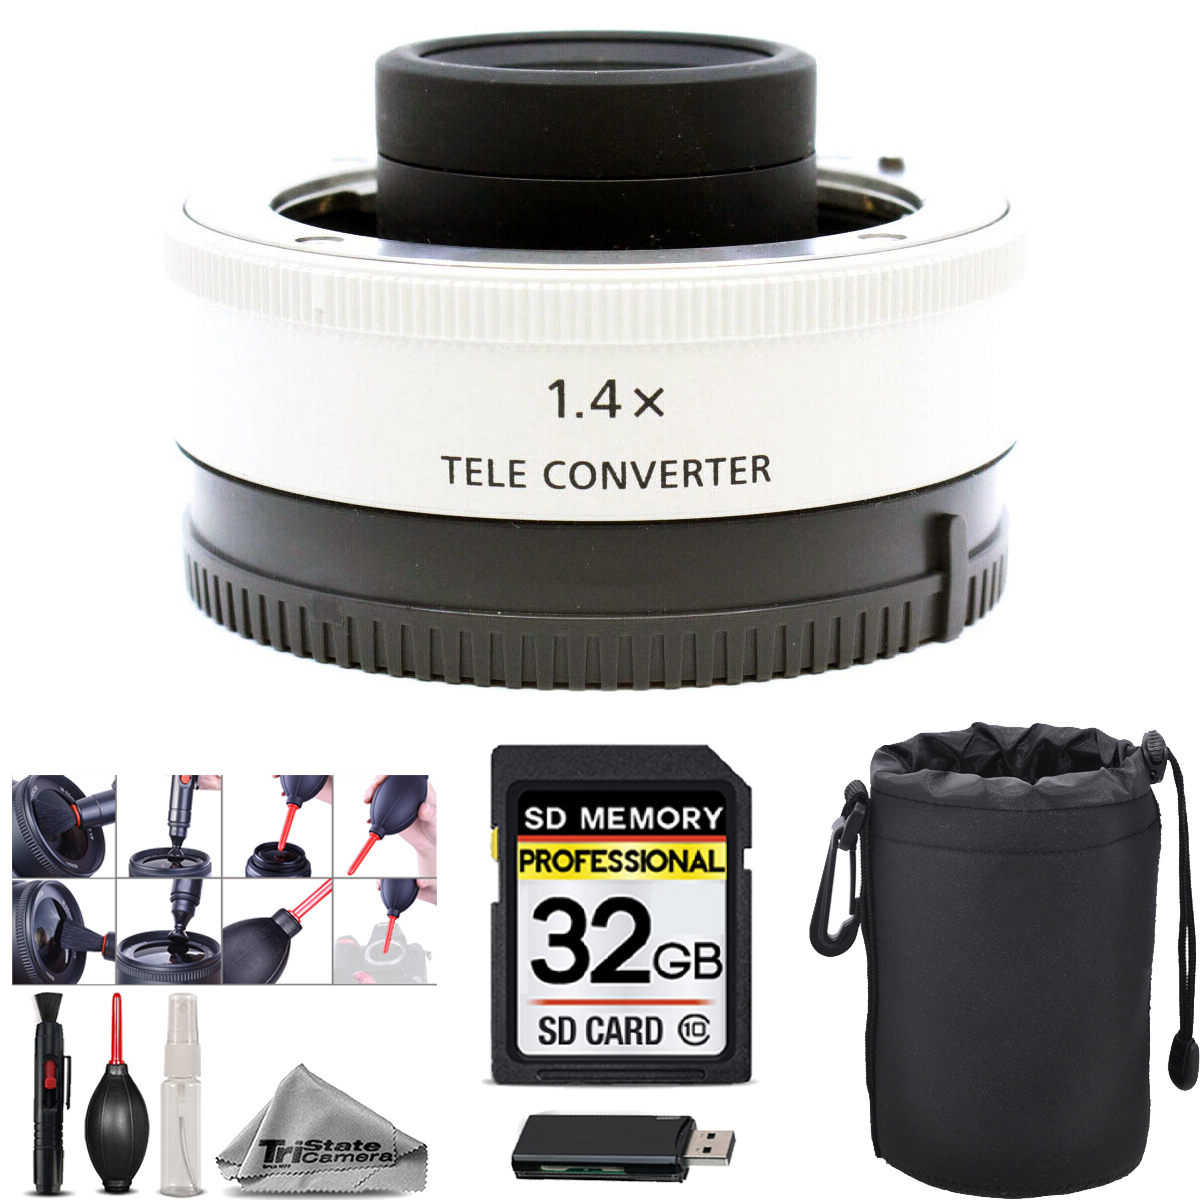 FE 1.4x Teleconverter + Lens Pouch + Cleaning Kit + Card Reader + 32GB *FREE SHIPPING*